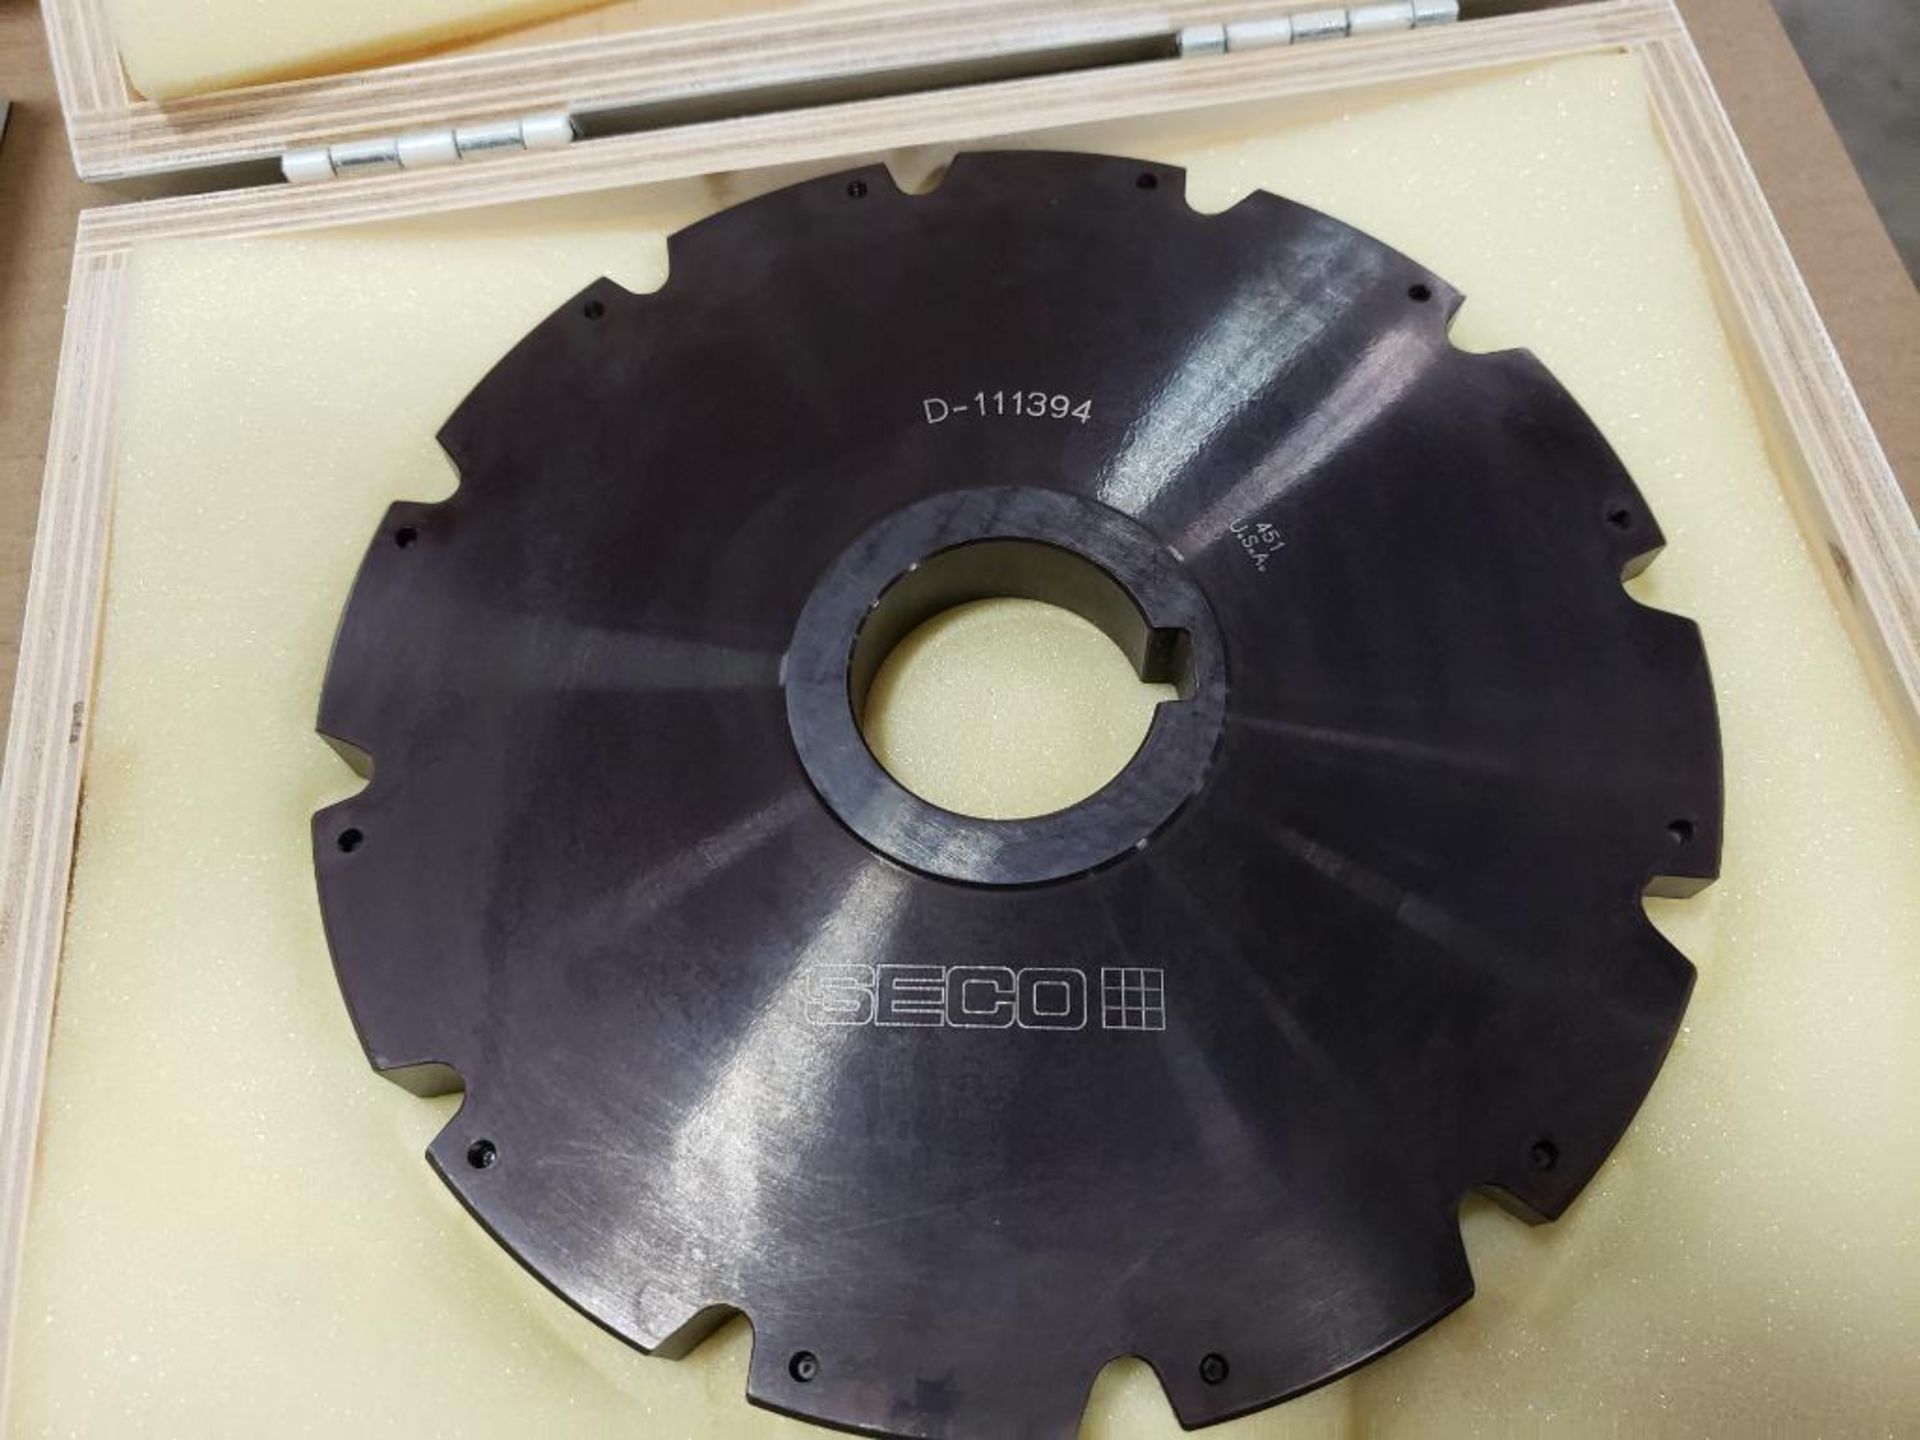 SECO 7 7/8" Facemill 1 3/4" Arbor D-111394 SECO 451 USA 335.19-08.00R 173254-1121/541 5/8" thick NEW - Image 4 of 4